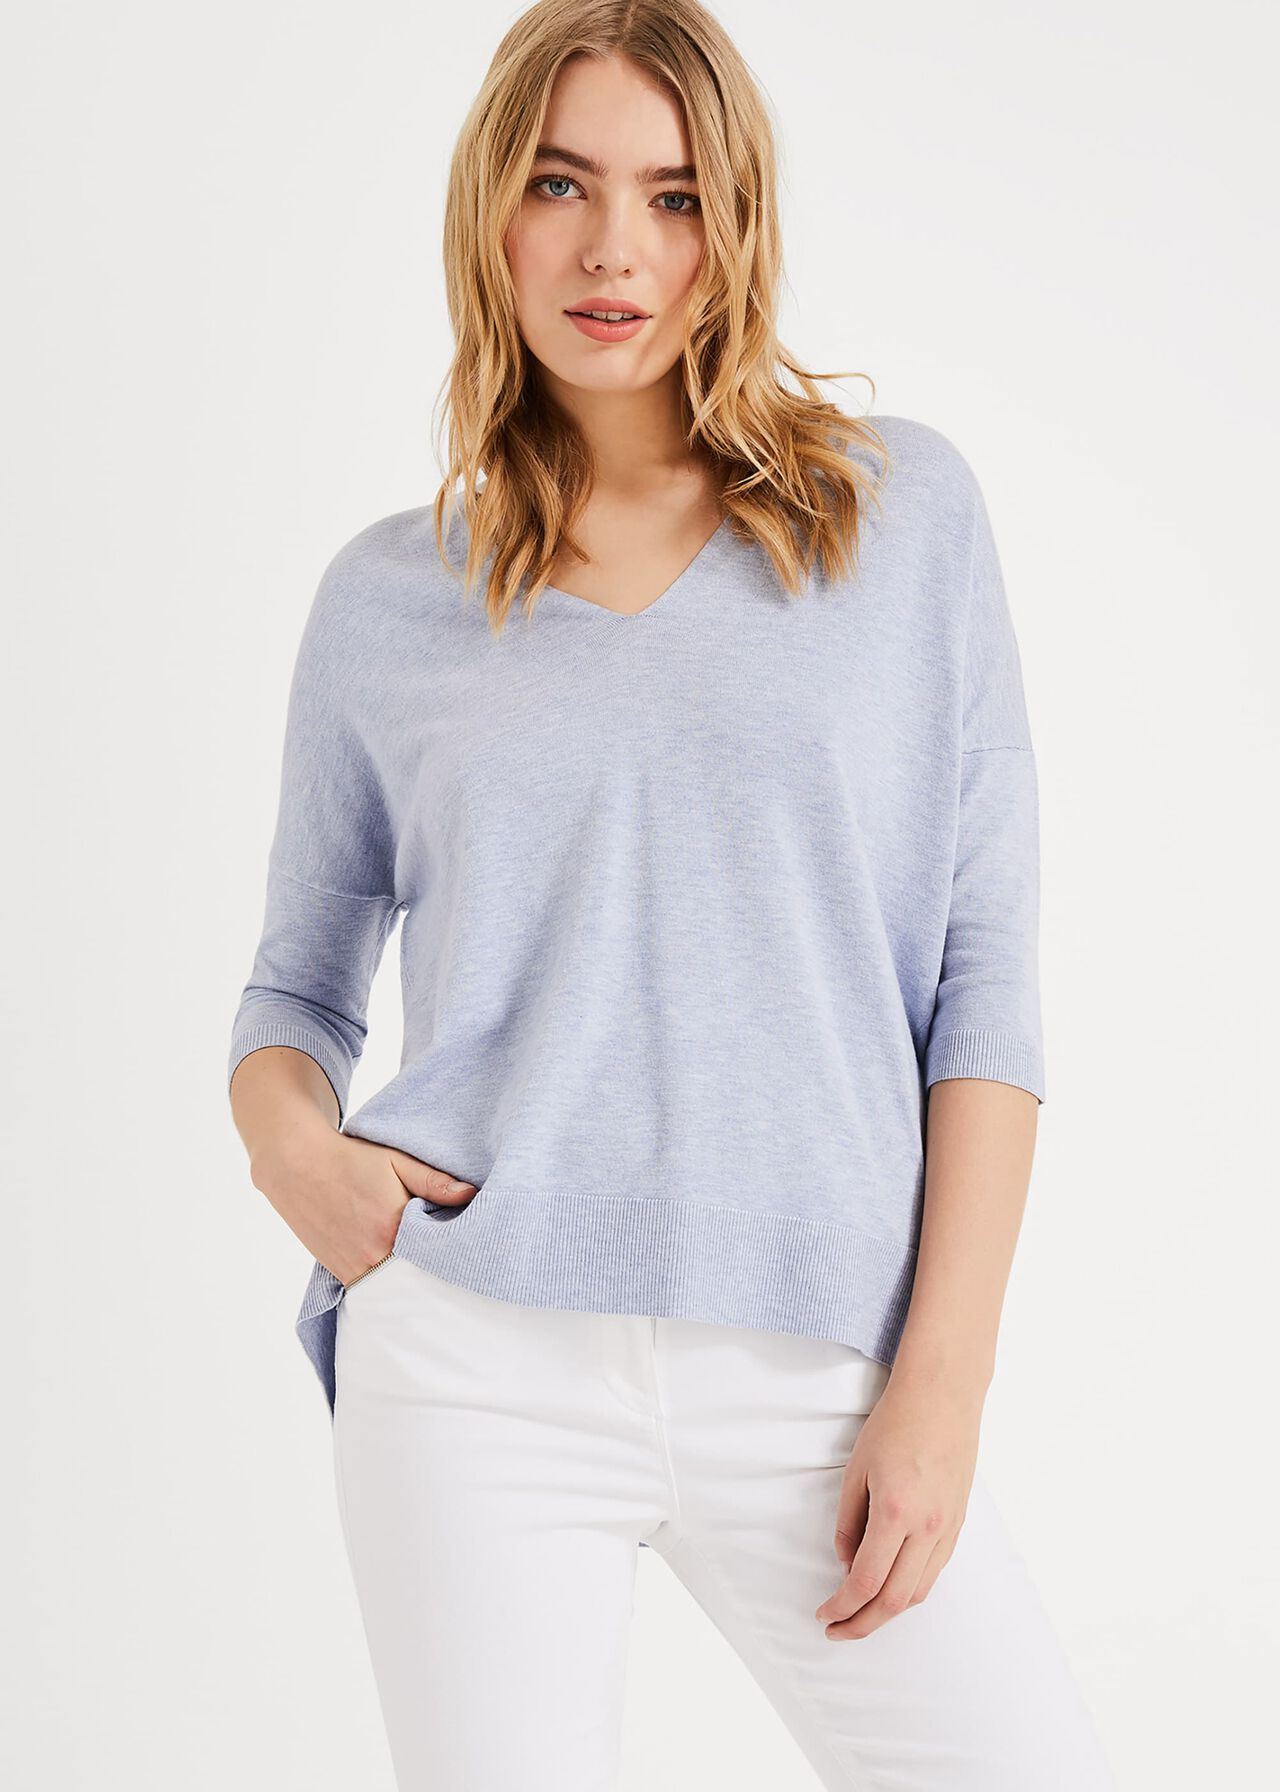 Estel Knitted Top